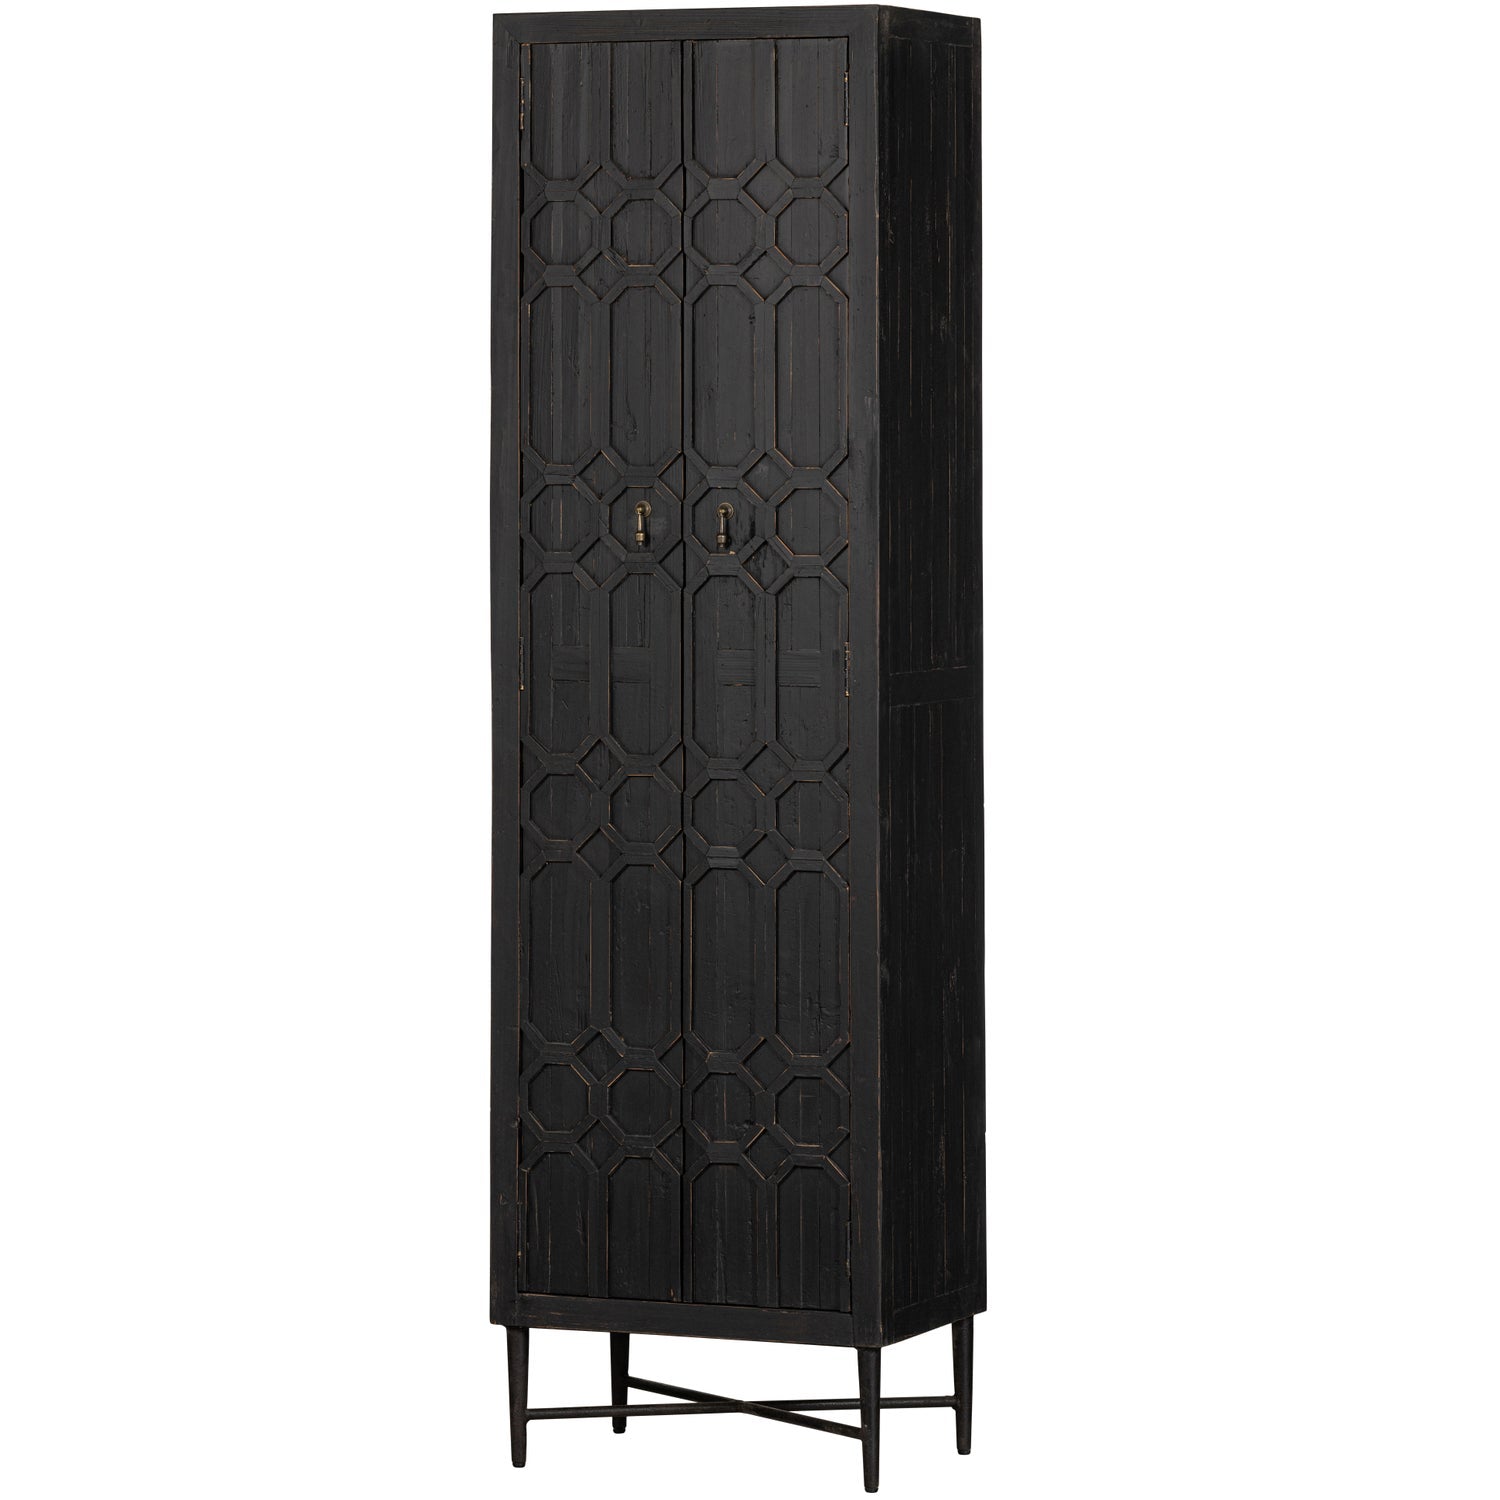 BEQUEST HIGH CABINET WOOD BLACK